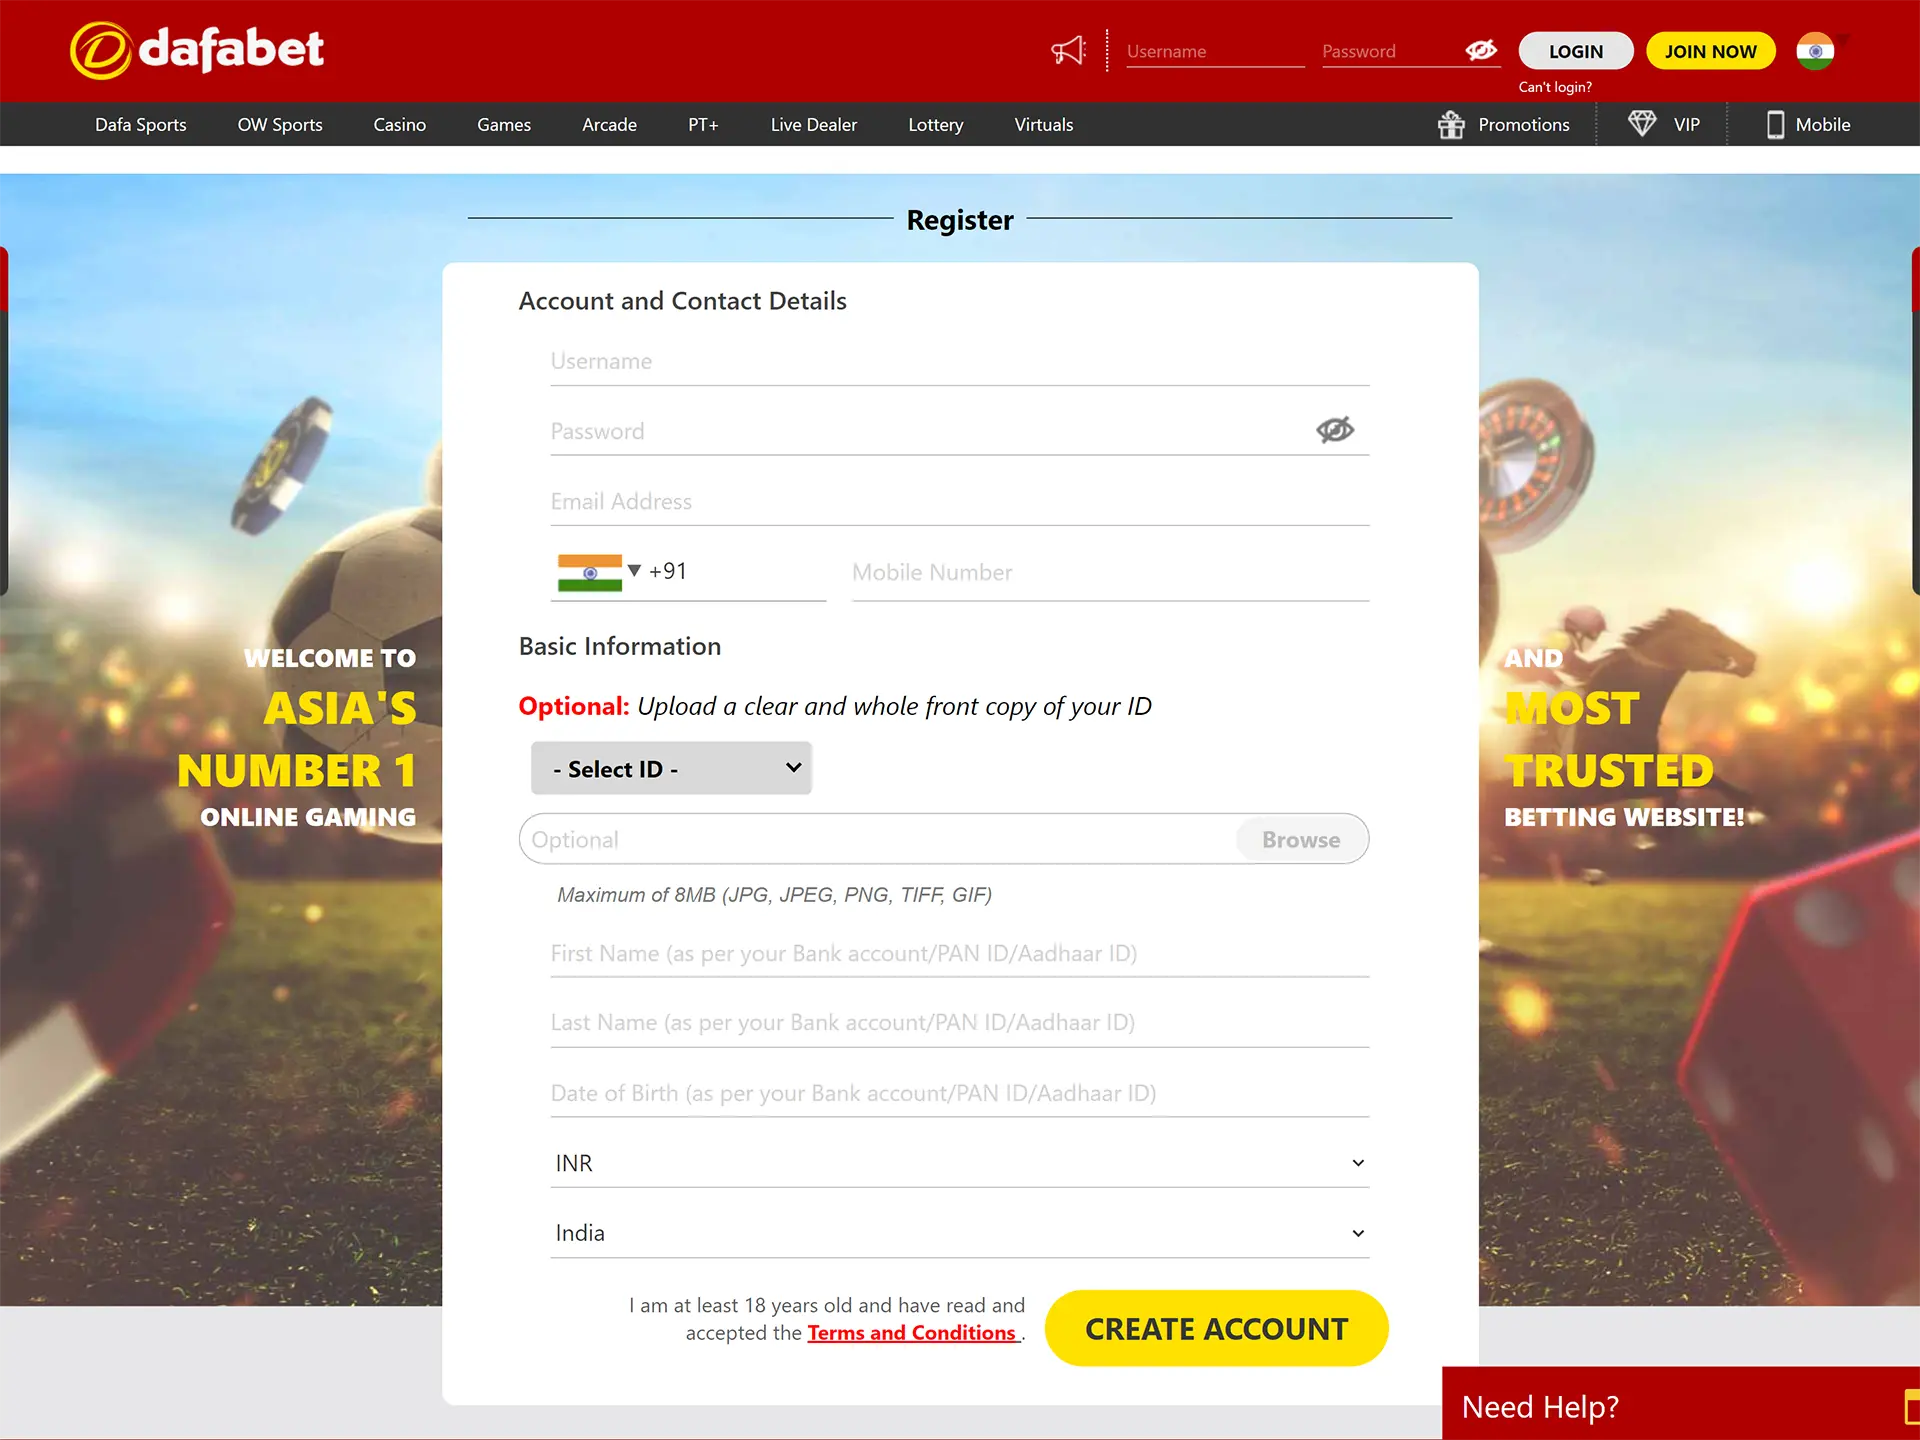 Open the Dafabet registration form, fill in the fields and confirm account creation.